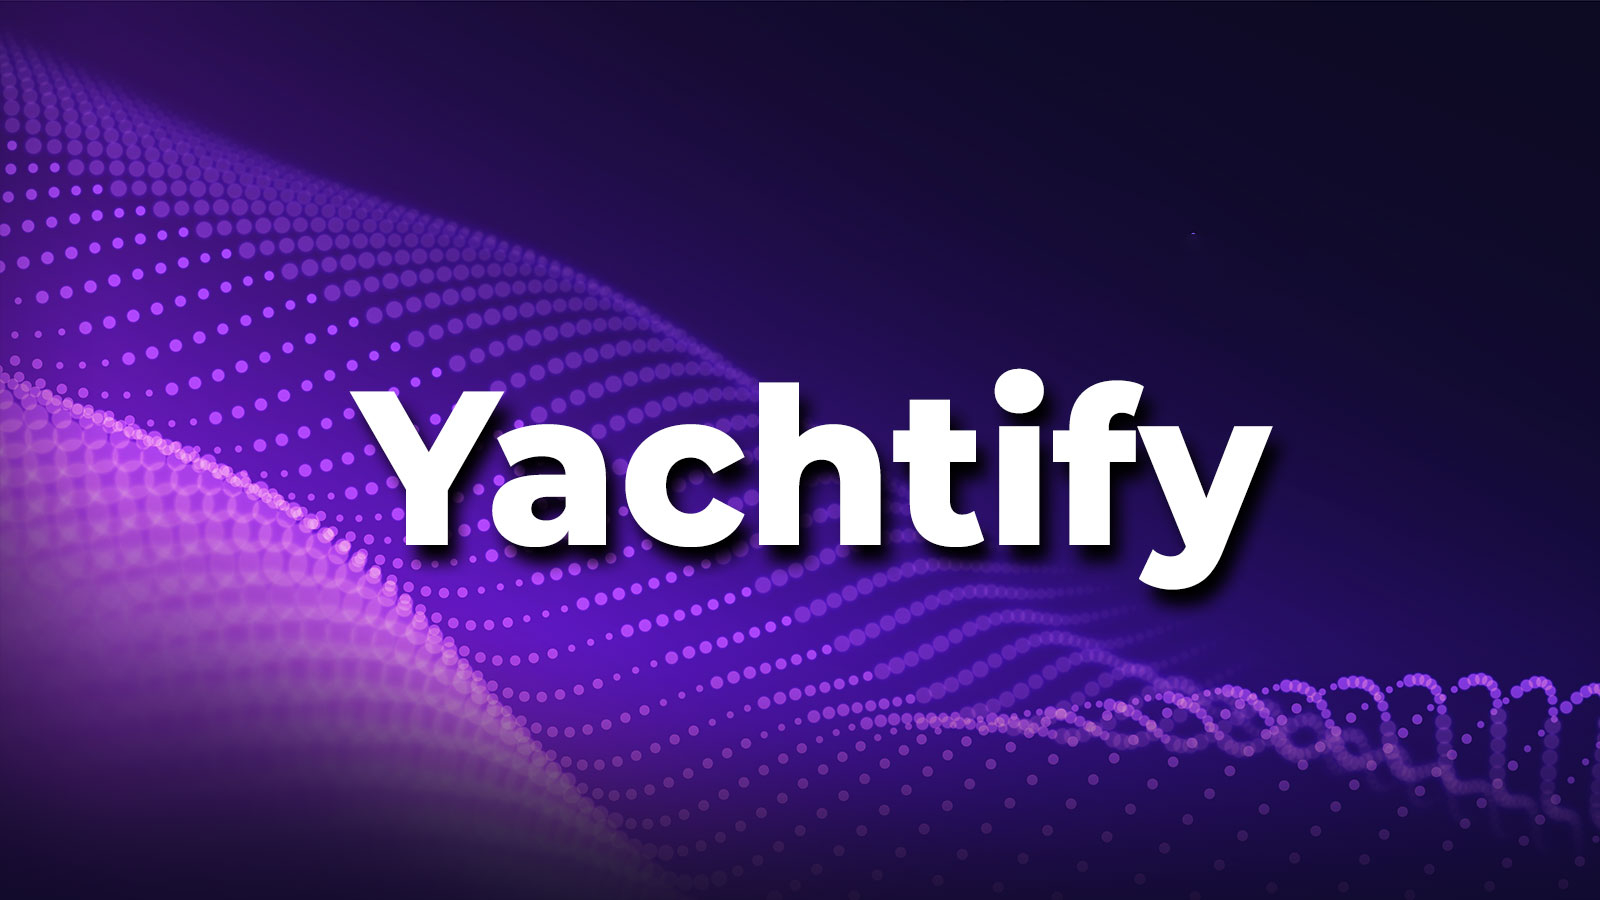 Yachtify (YCHT) Community Enters Novel Phase of Pre-Sale while Polkadot (DOT) and Solana (SOL) Promoting New Upgrades